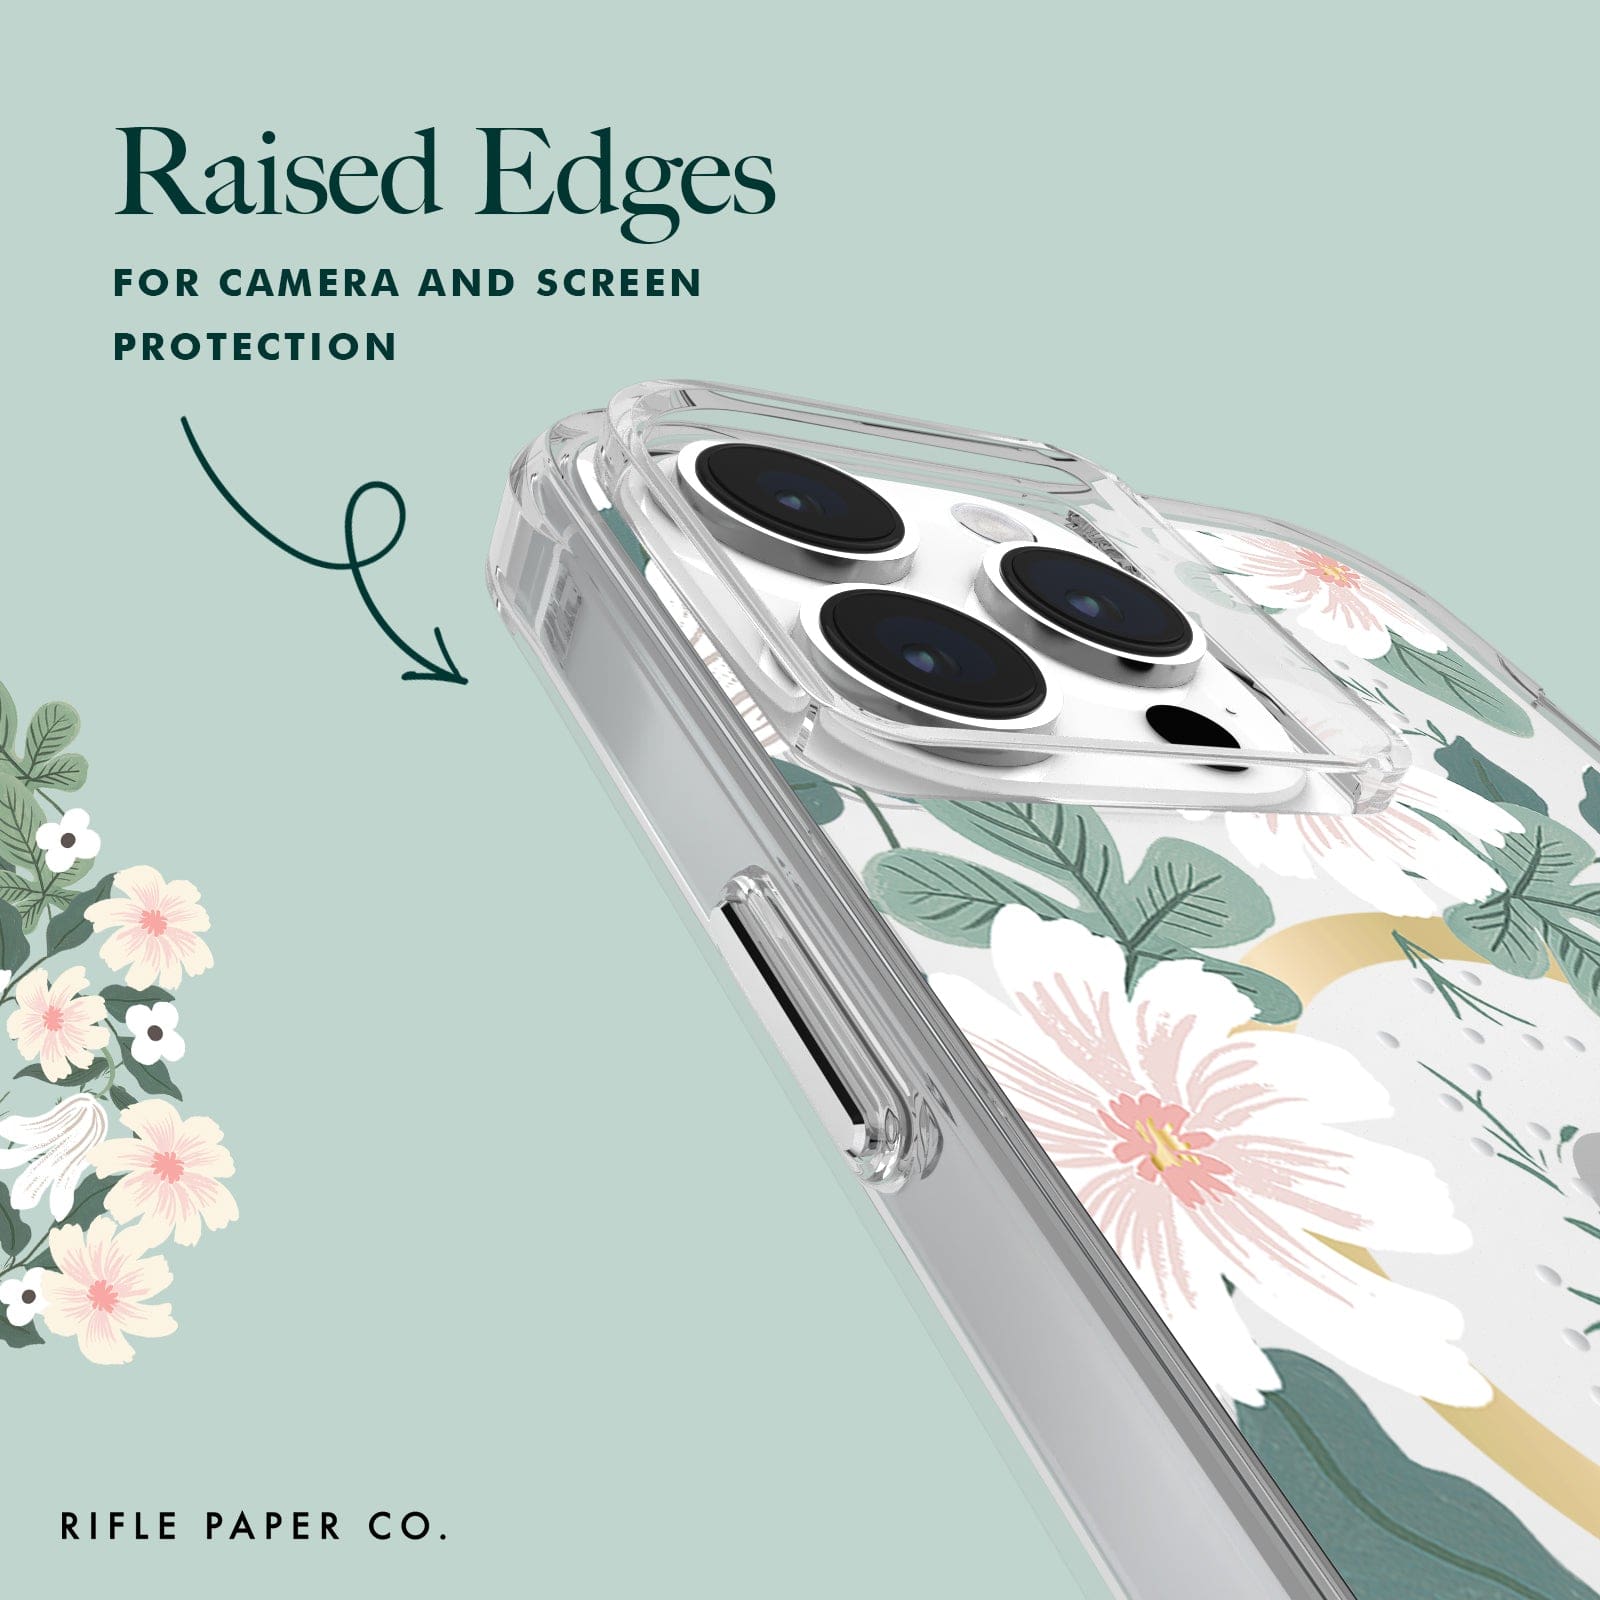 RAISED EDGES FOR CAMERA AND SCREEN PROTECTION